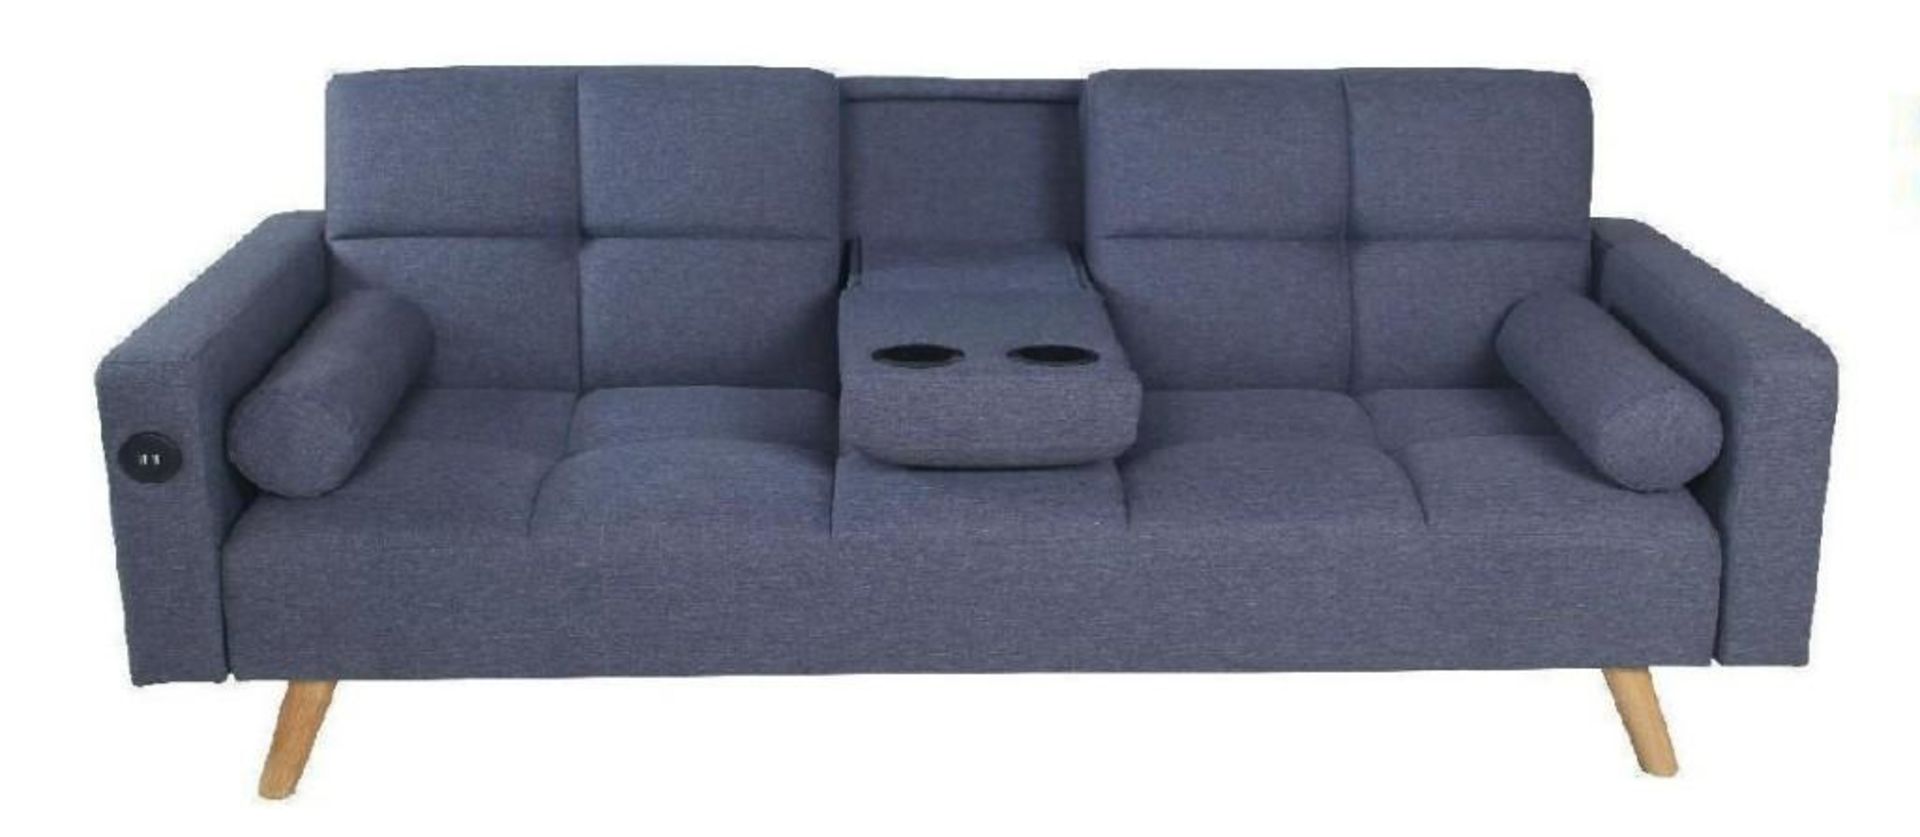 *NO VAT ON HAMMER* Brand new Boxed 2 Seater Clic Clac USB Sofa Bed - Image 4 of 10